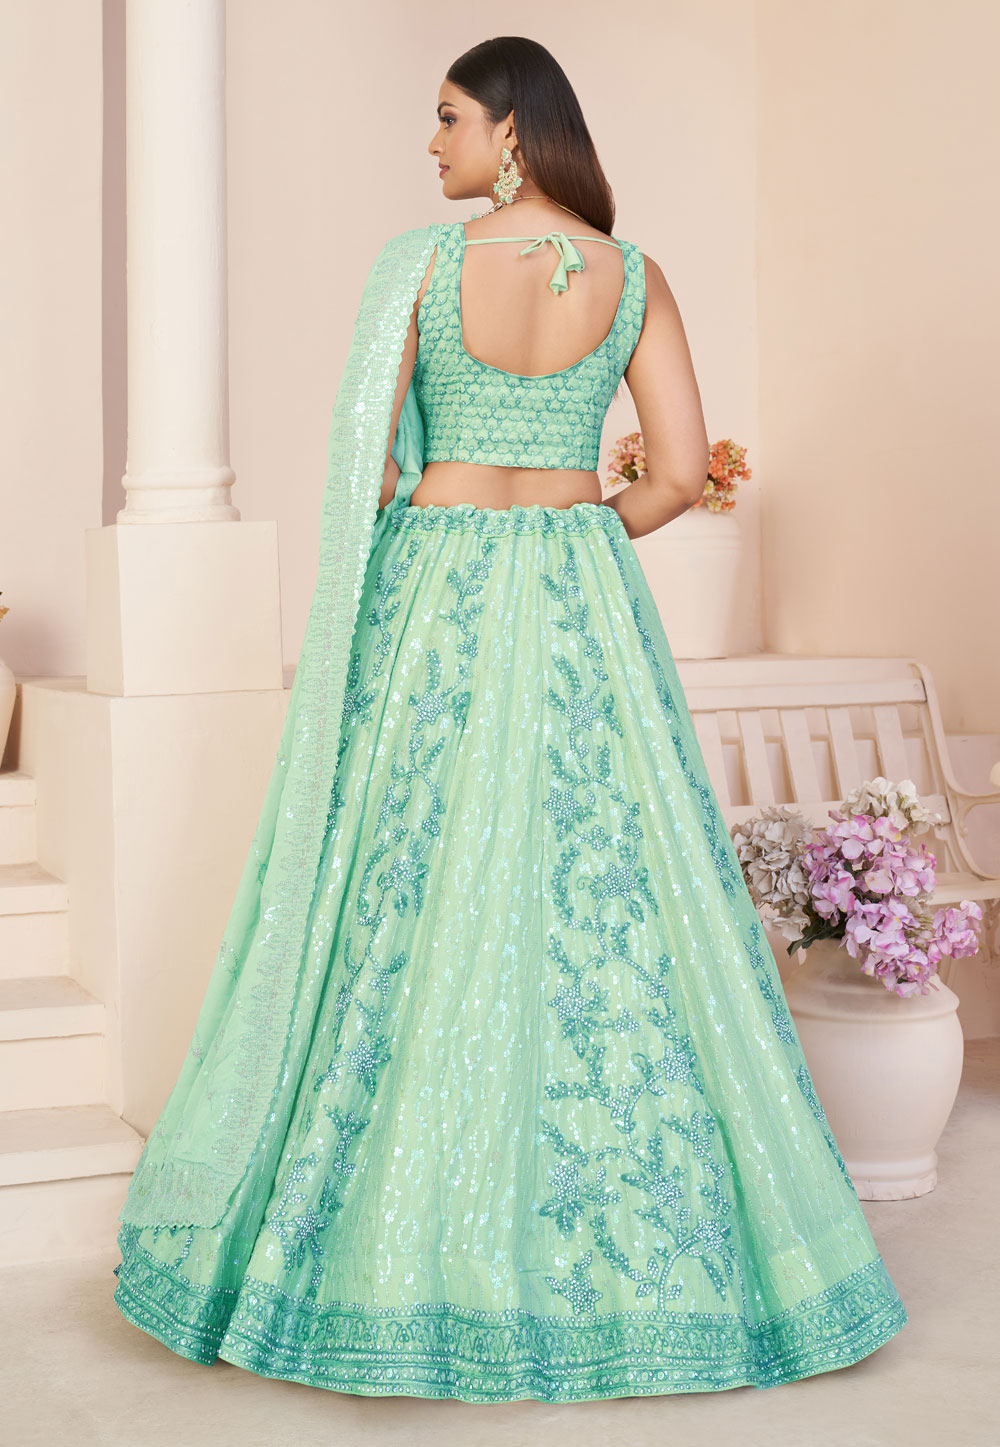 Classy Designer Indian Wedding and Reception lehenga choli with Embroidery  Bespoke made to order -